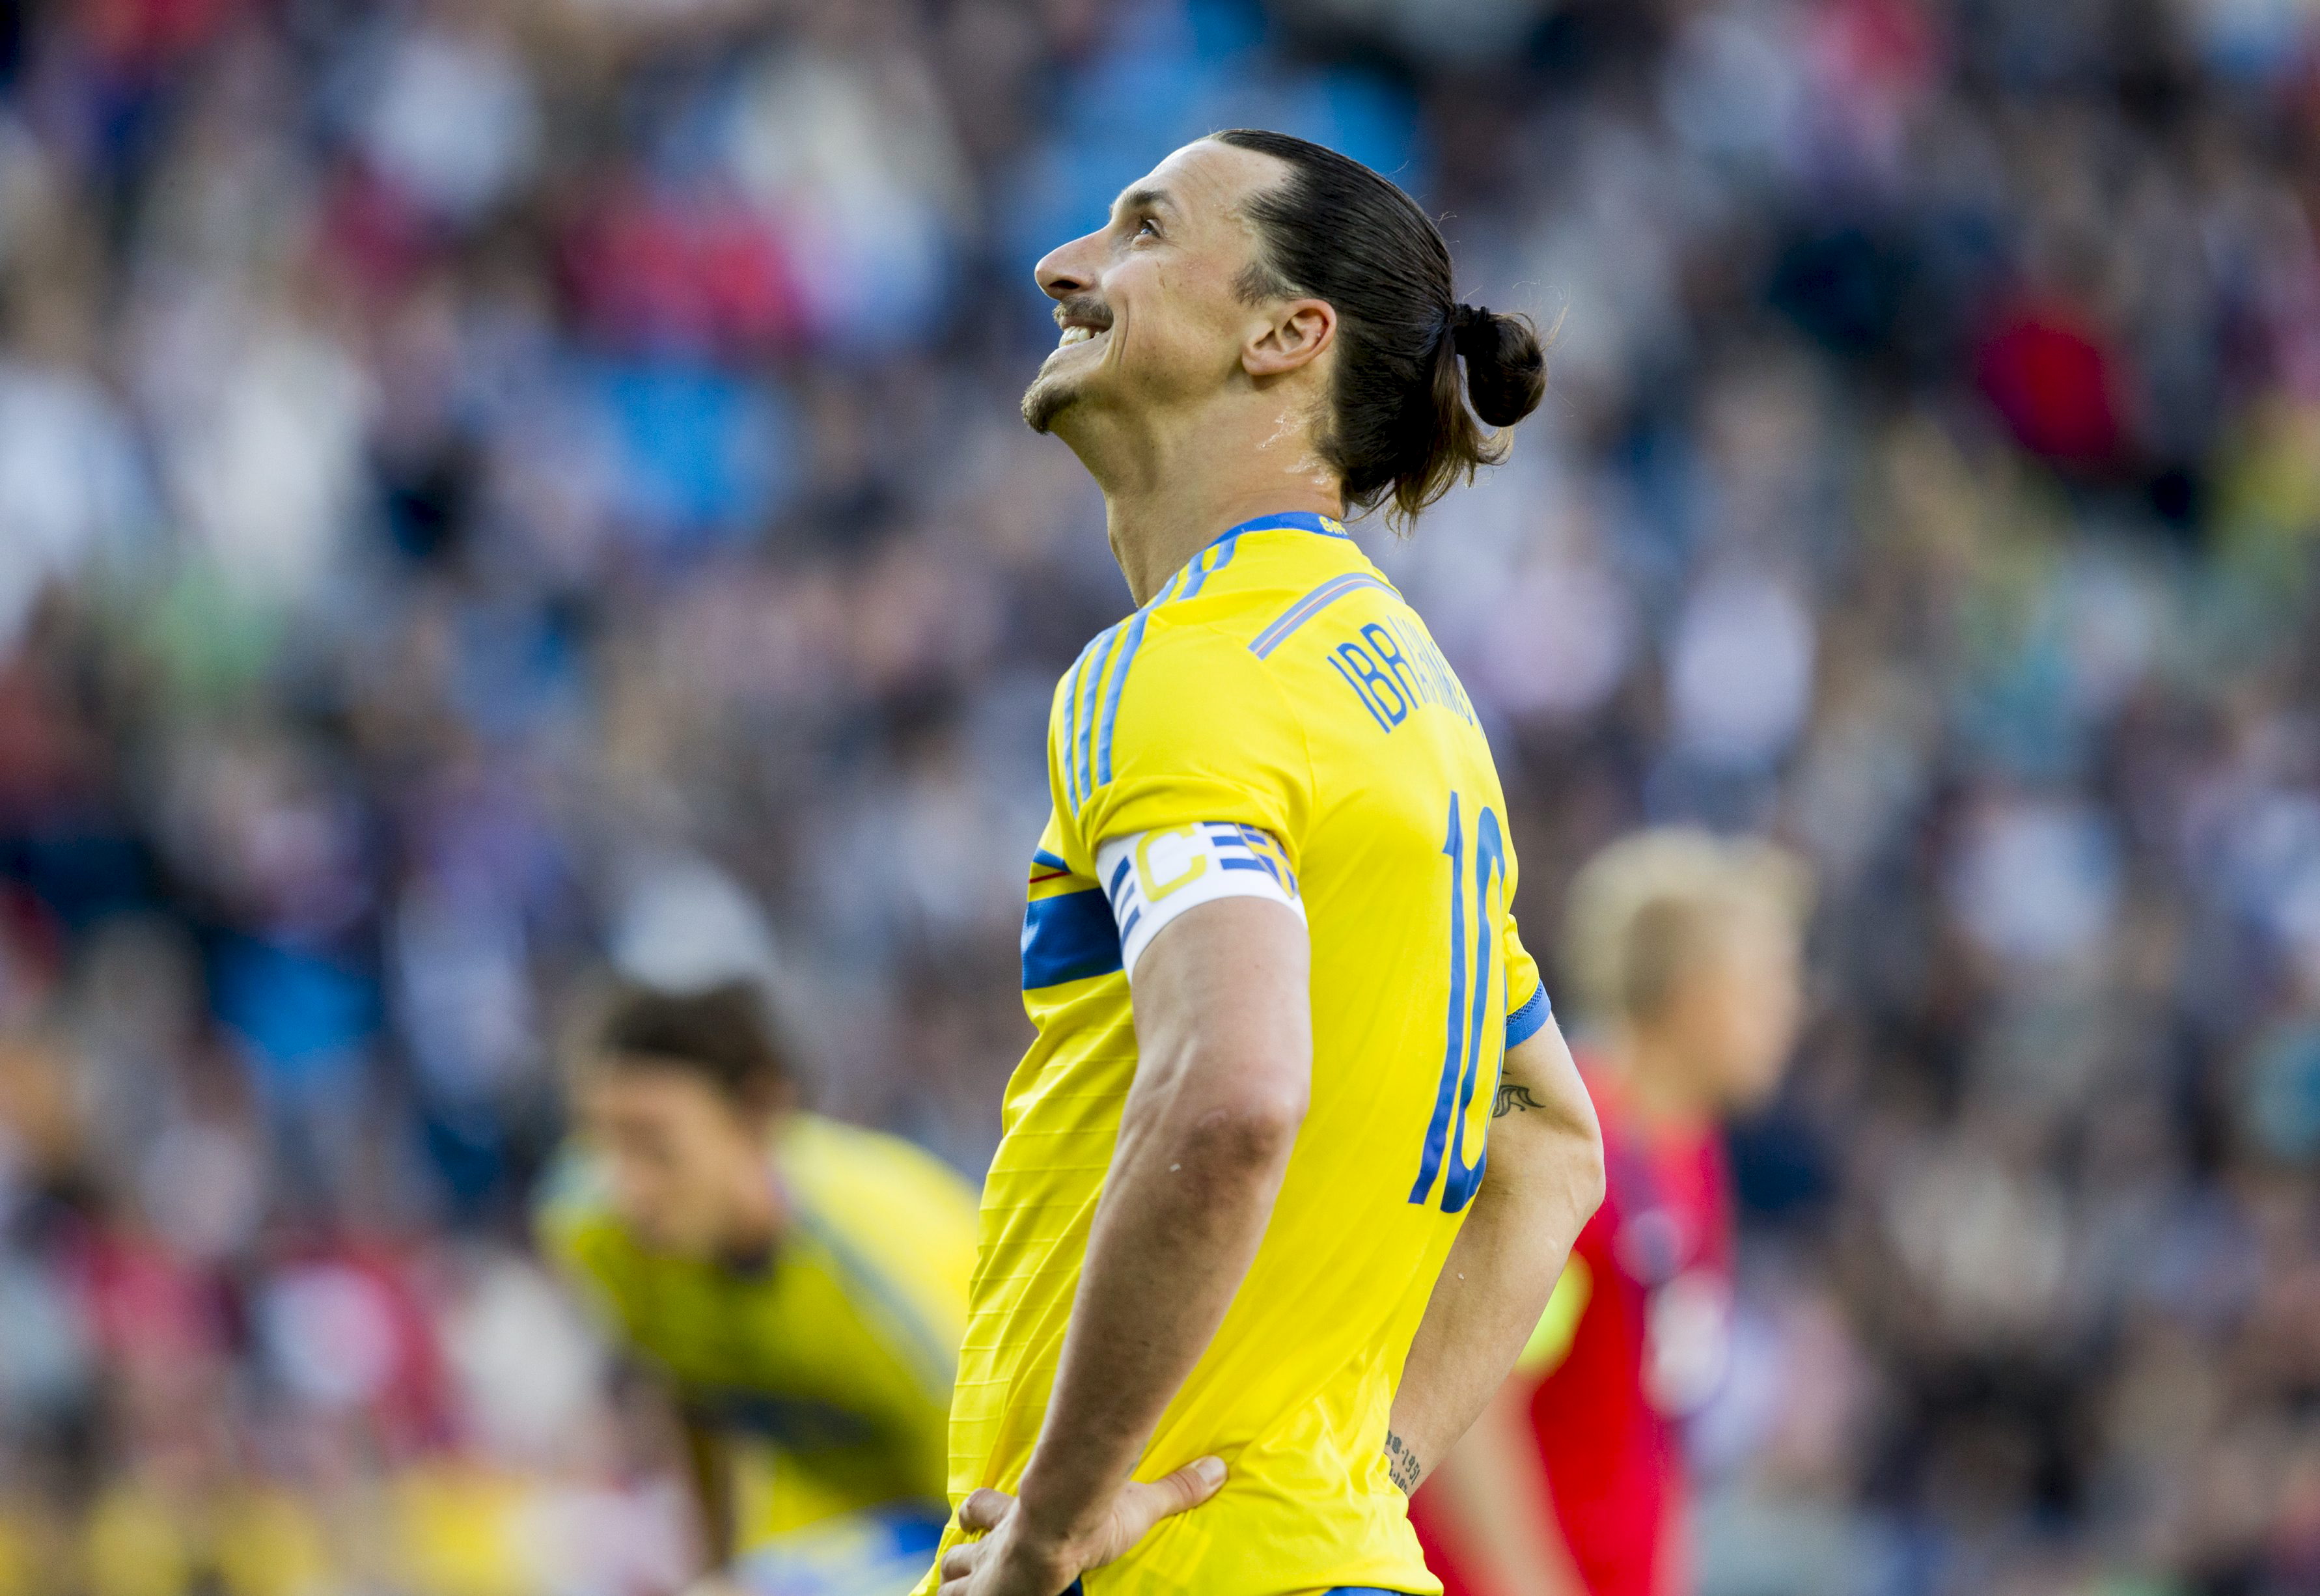 Sweden's captain Zlatan Ibrahimovic reacts during an international friendly soccer match between Norway and Sweden at Ullevaal Stadium in Oslo, Norway, June 8, 2015. REUTERS/Vegard Wivestad Grott/NTB Scanpix THIS IMAGE HAS BEEN SUPPLIED BY A THIRD PARTY. IT IS DISTRIBUTED, EXACTLY AS RECEIVED BY REUTERS, AS A SERVICE TO CLIENTS. NORWAY OUT. NO COMMERCIAL OR EDITORIAL SALES IN NORWAY. NO COMMERCIAL SALES. - RTX1FP3R